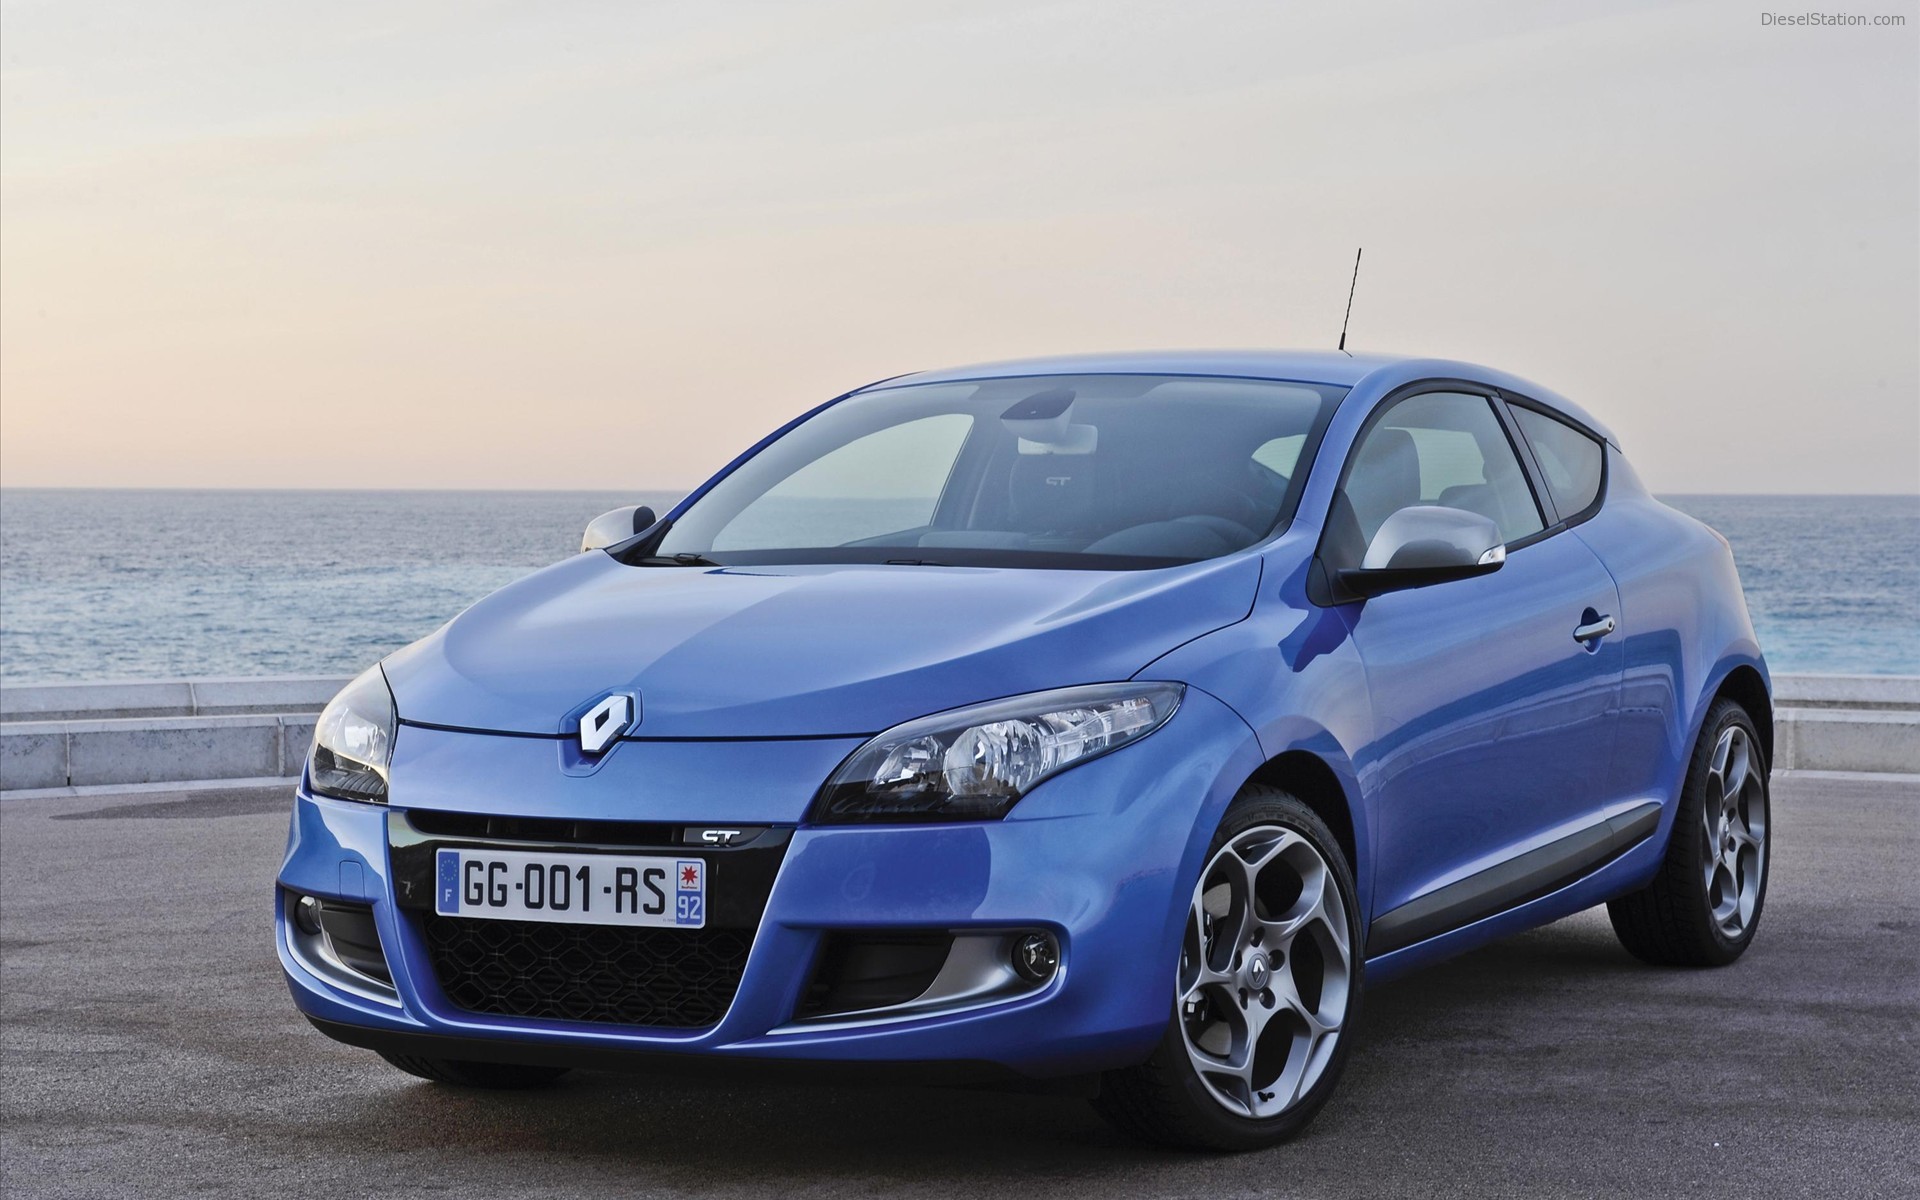 Renault Megane Coupe Gt Widescreen Exotic Car Image